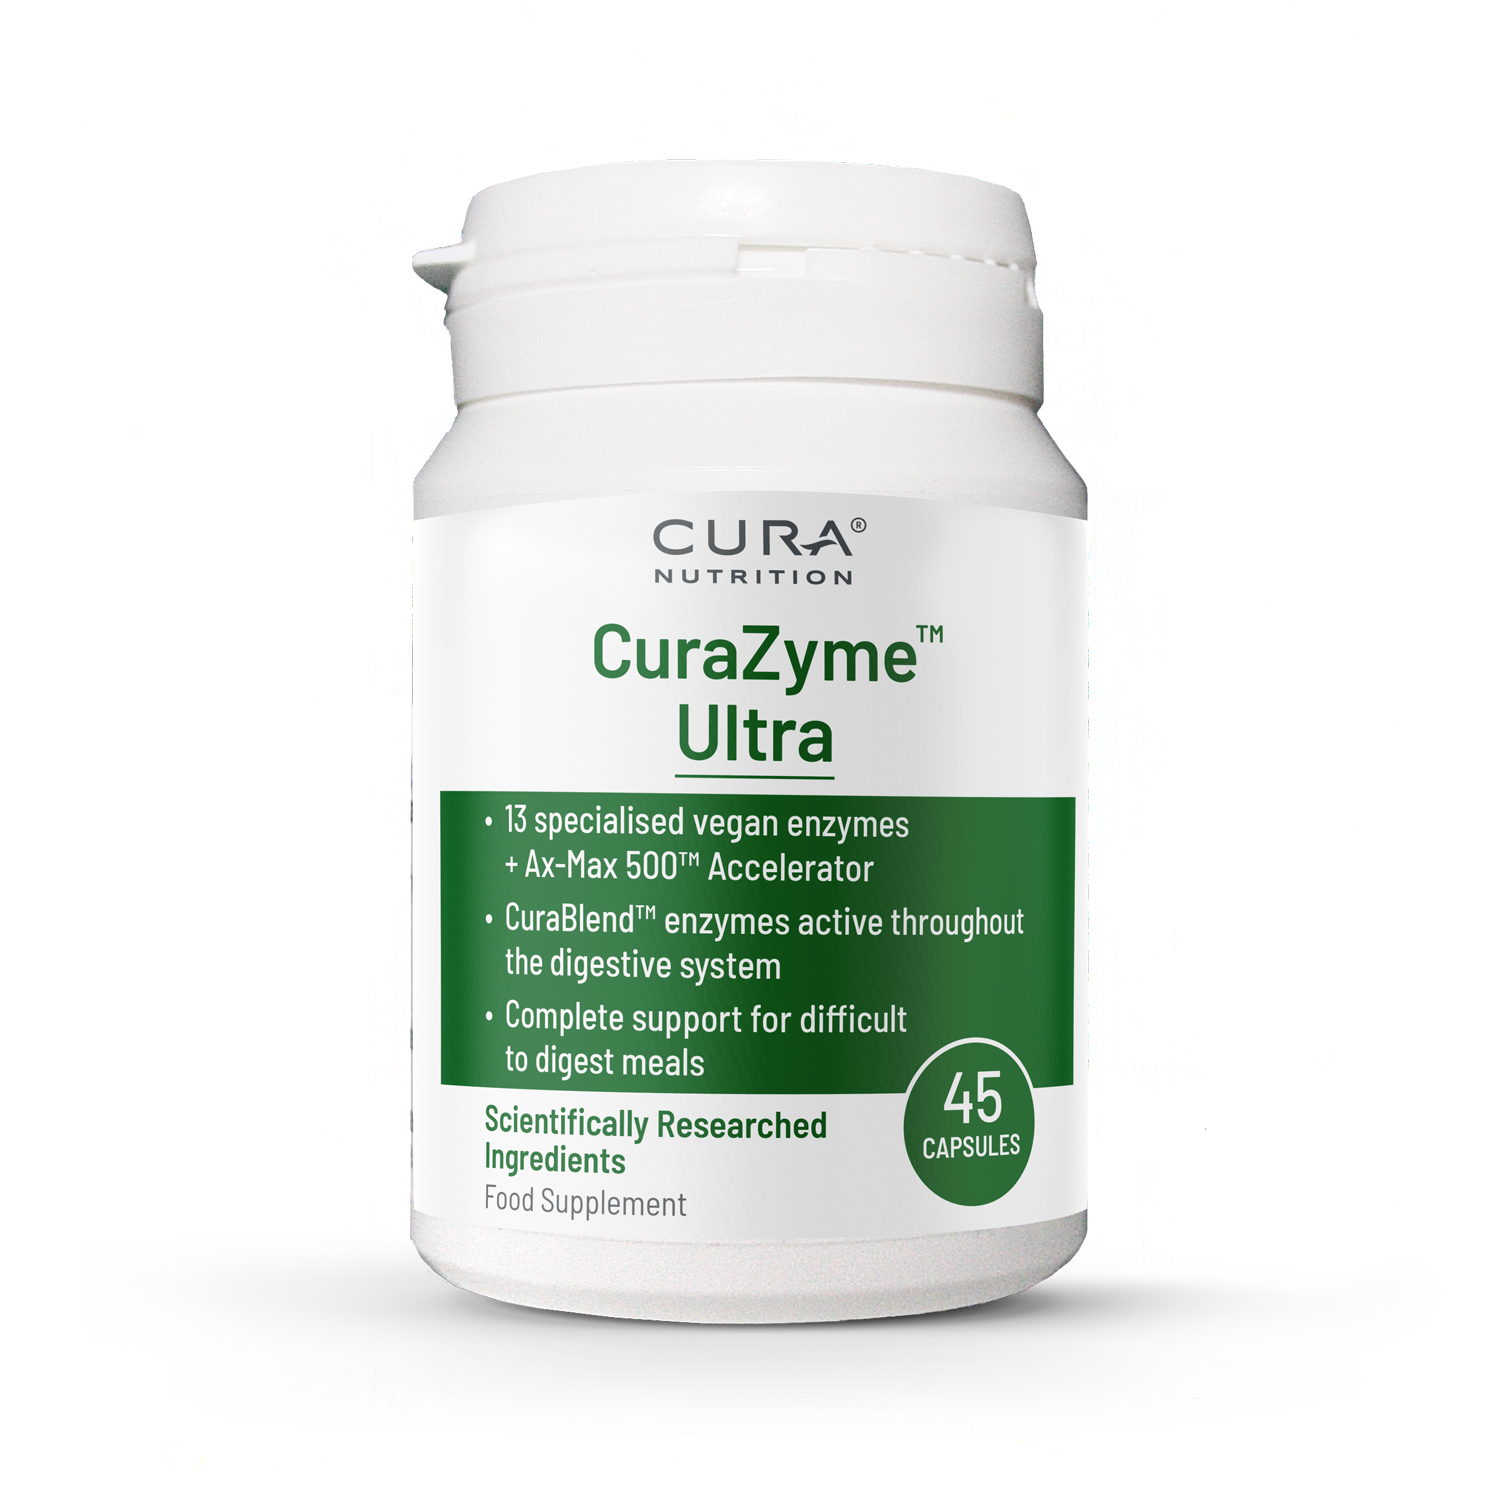 CuraZyme Ultra - Advanced Digestive Relief - 45 Capsules | Cura Nutrition